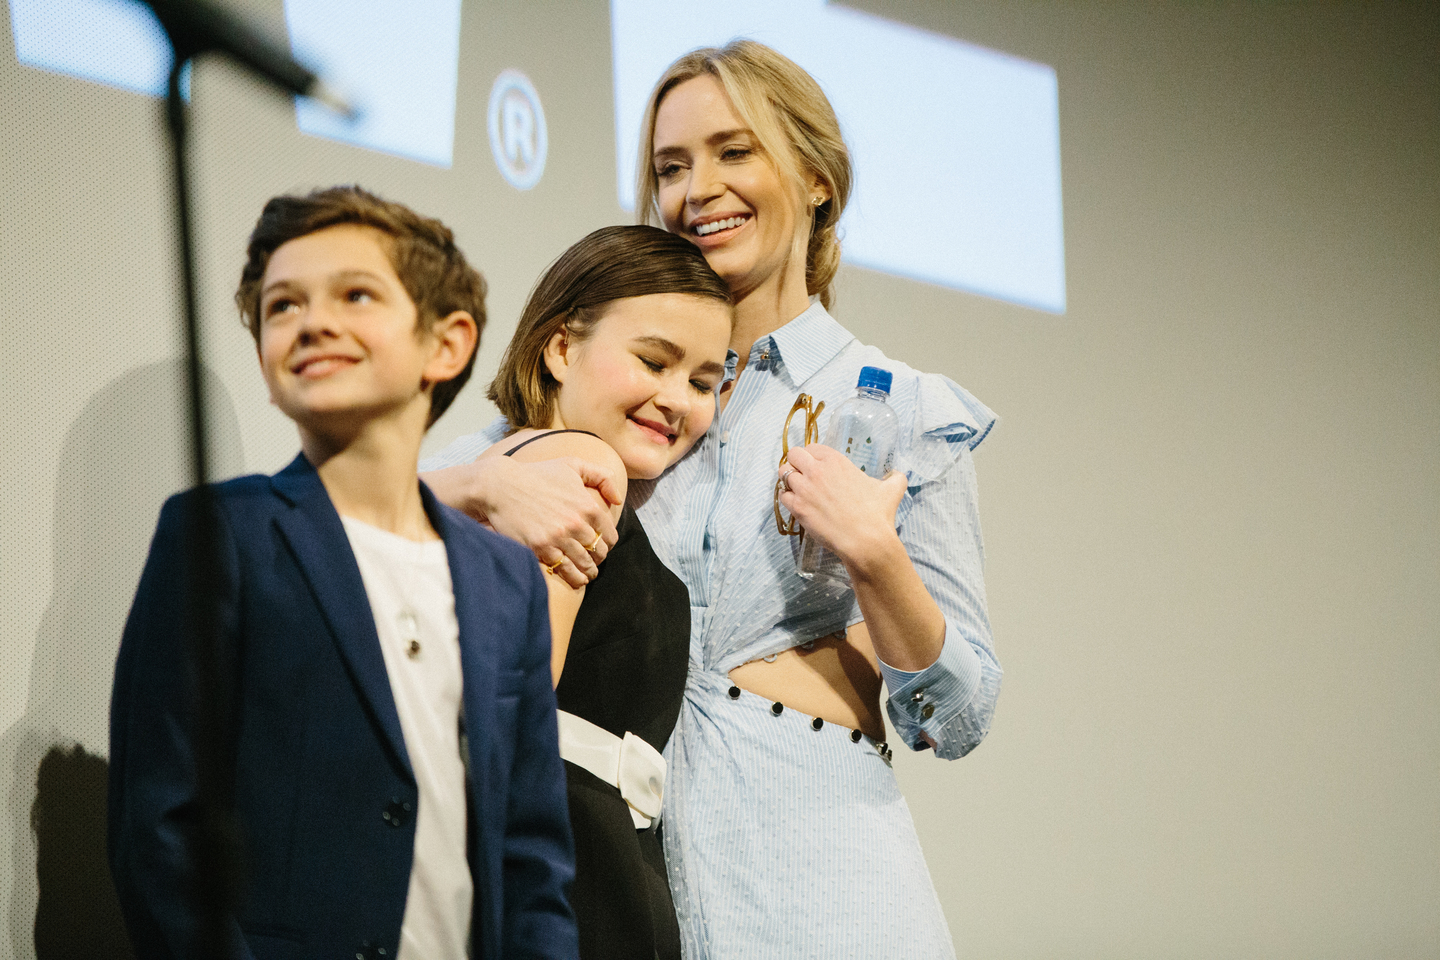 Noah Jupe, Millicent Simmonds, and Emily Blunt at the A Quiet Place Opening Night Film Q&A. Photo by Alexa Gonzalez Wagner